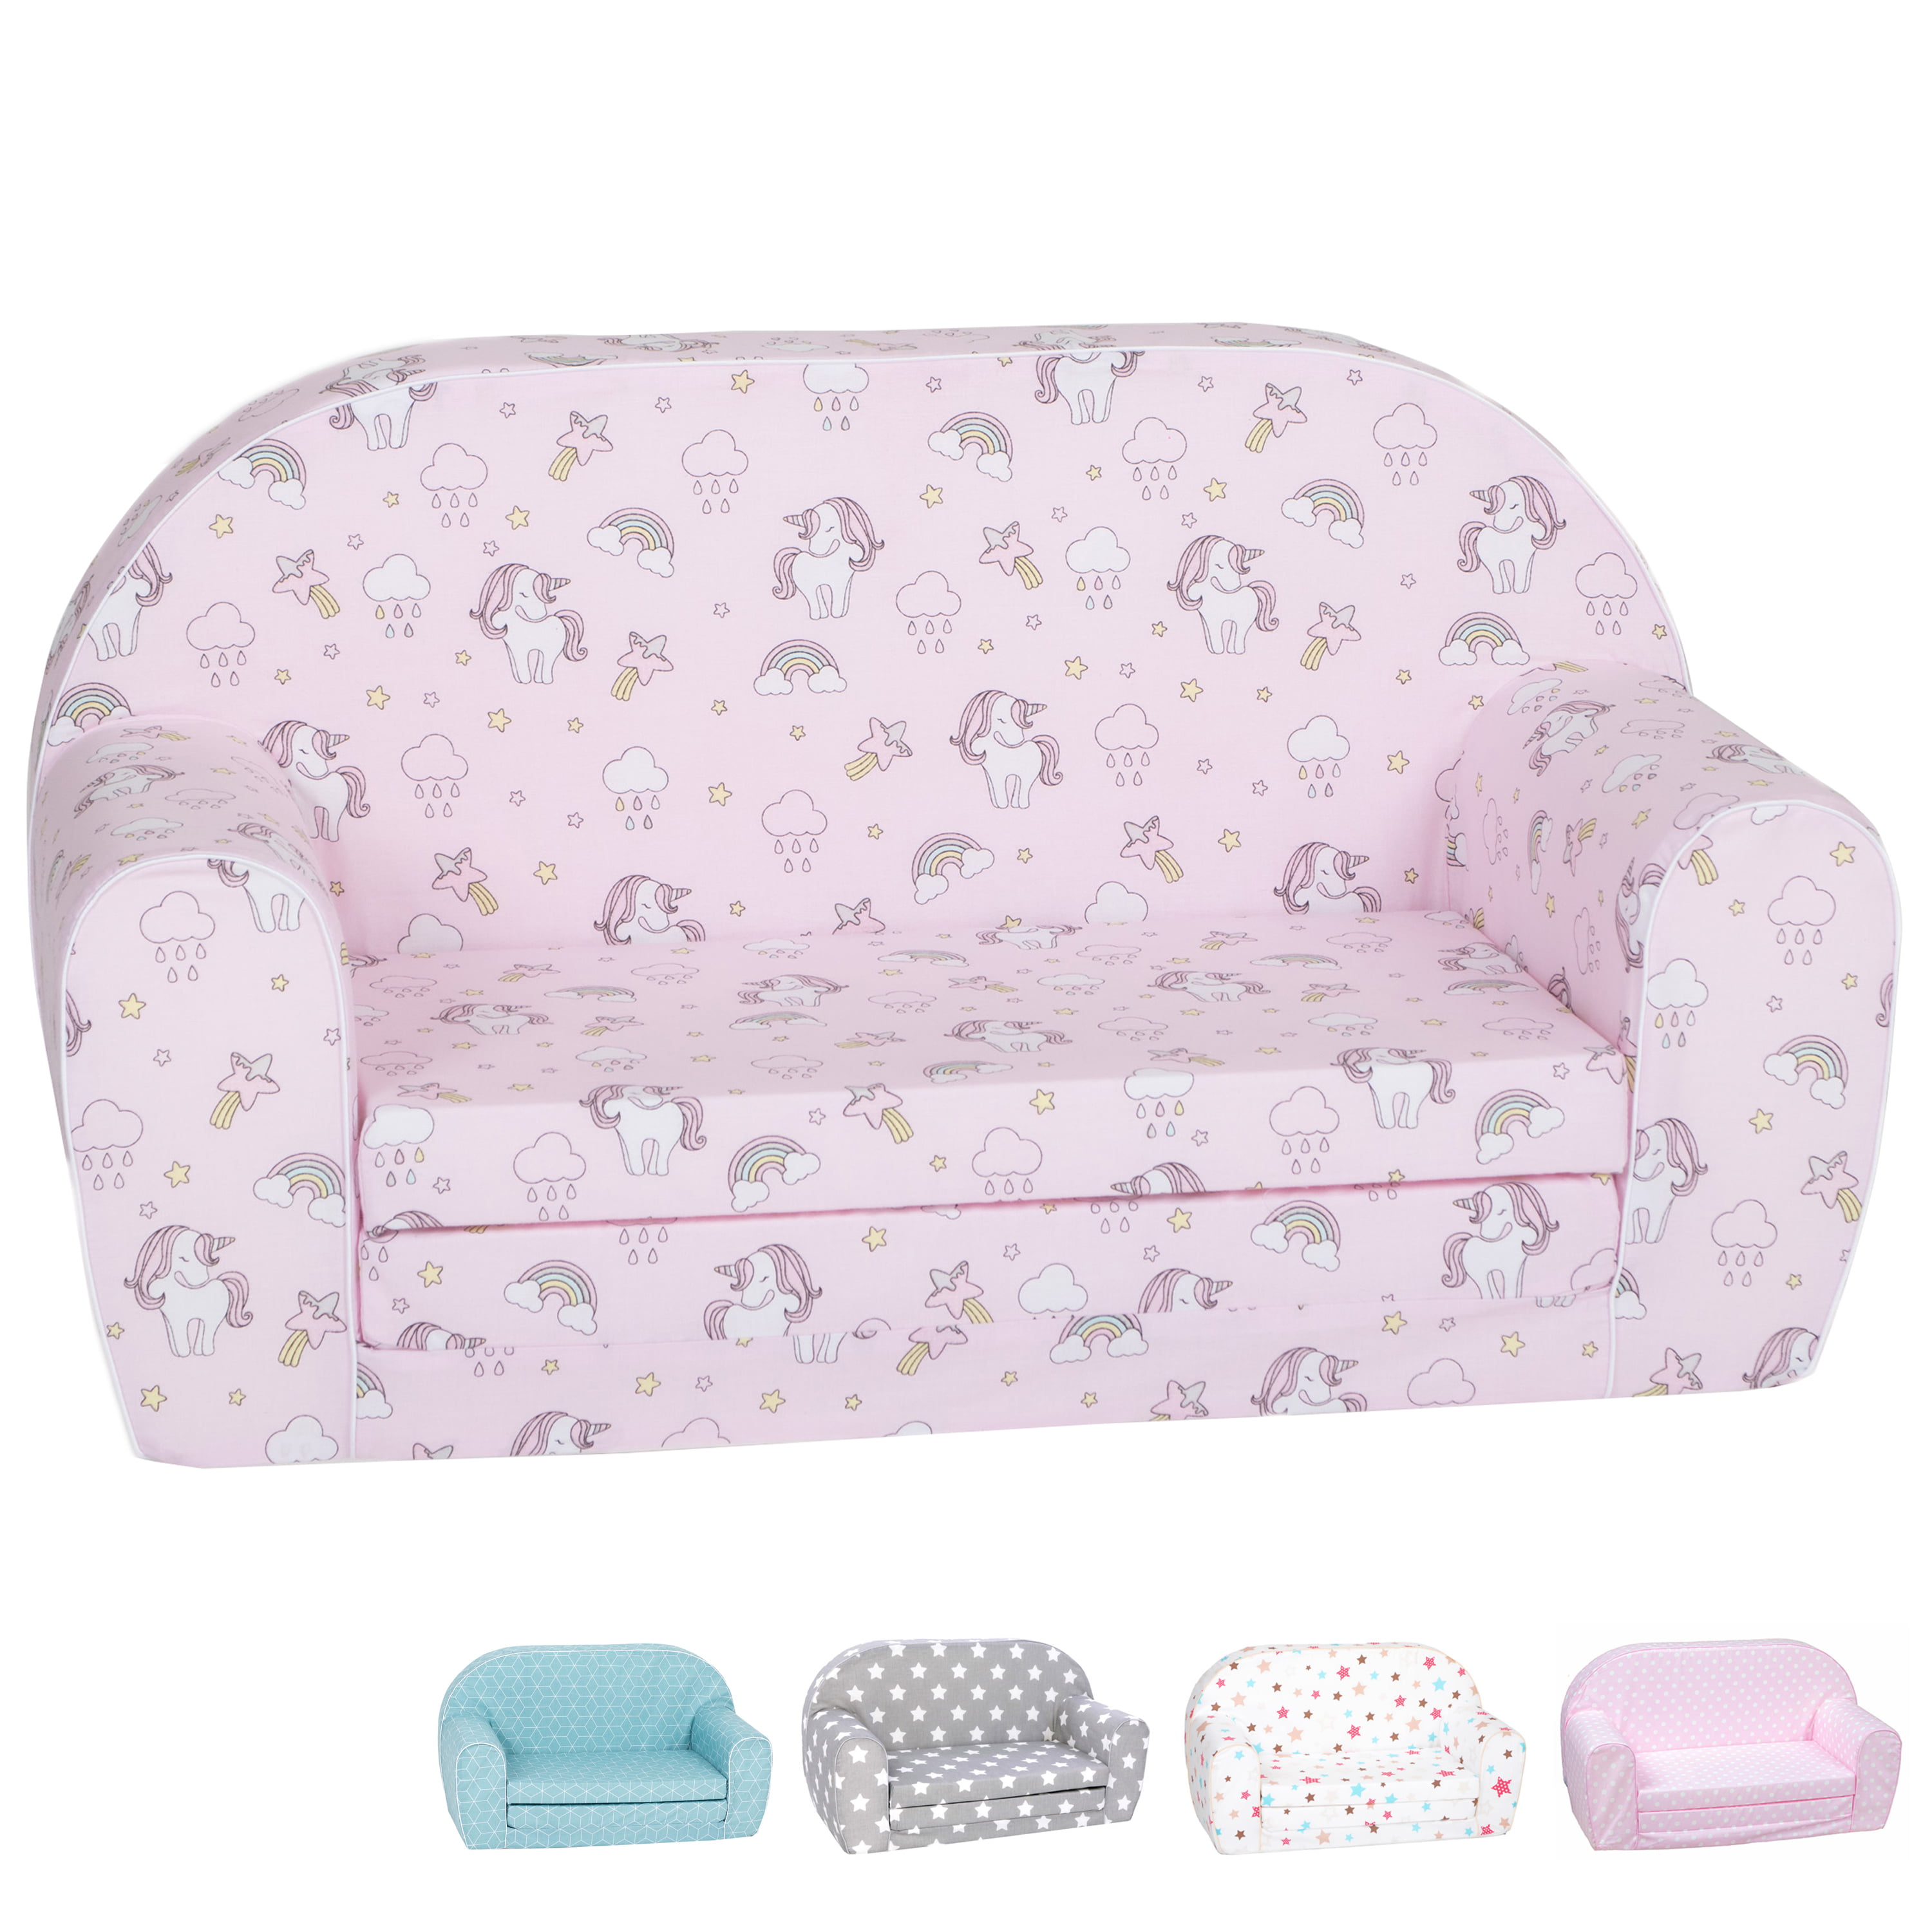 DELSIT Toddler Couch & Kids Sofa - European Made Children's 2 in 1 Flip Open Foam Double Sofa - Kids Folding Sofa, Kids Couch - Comfy fold Out Lounge (Unicorns and Rainbows Pink)